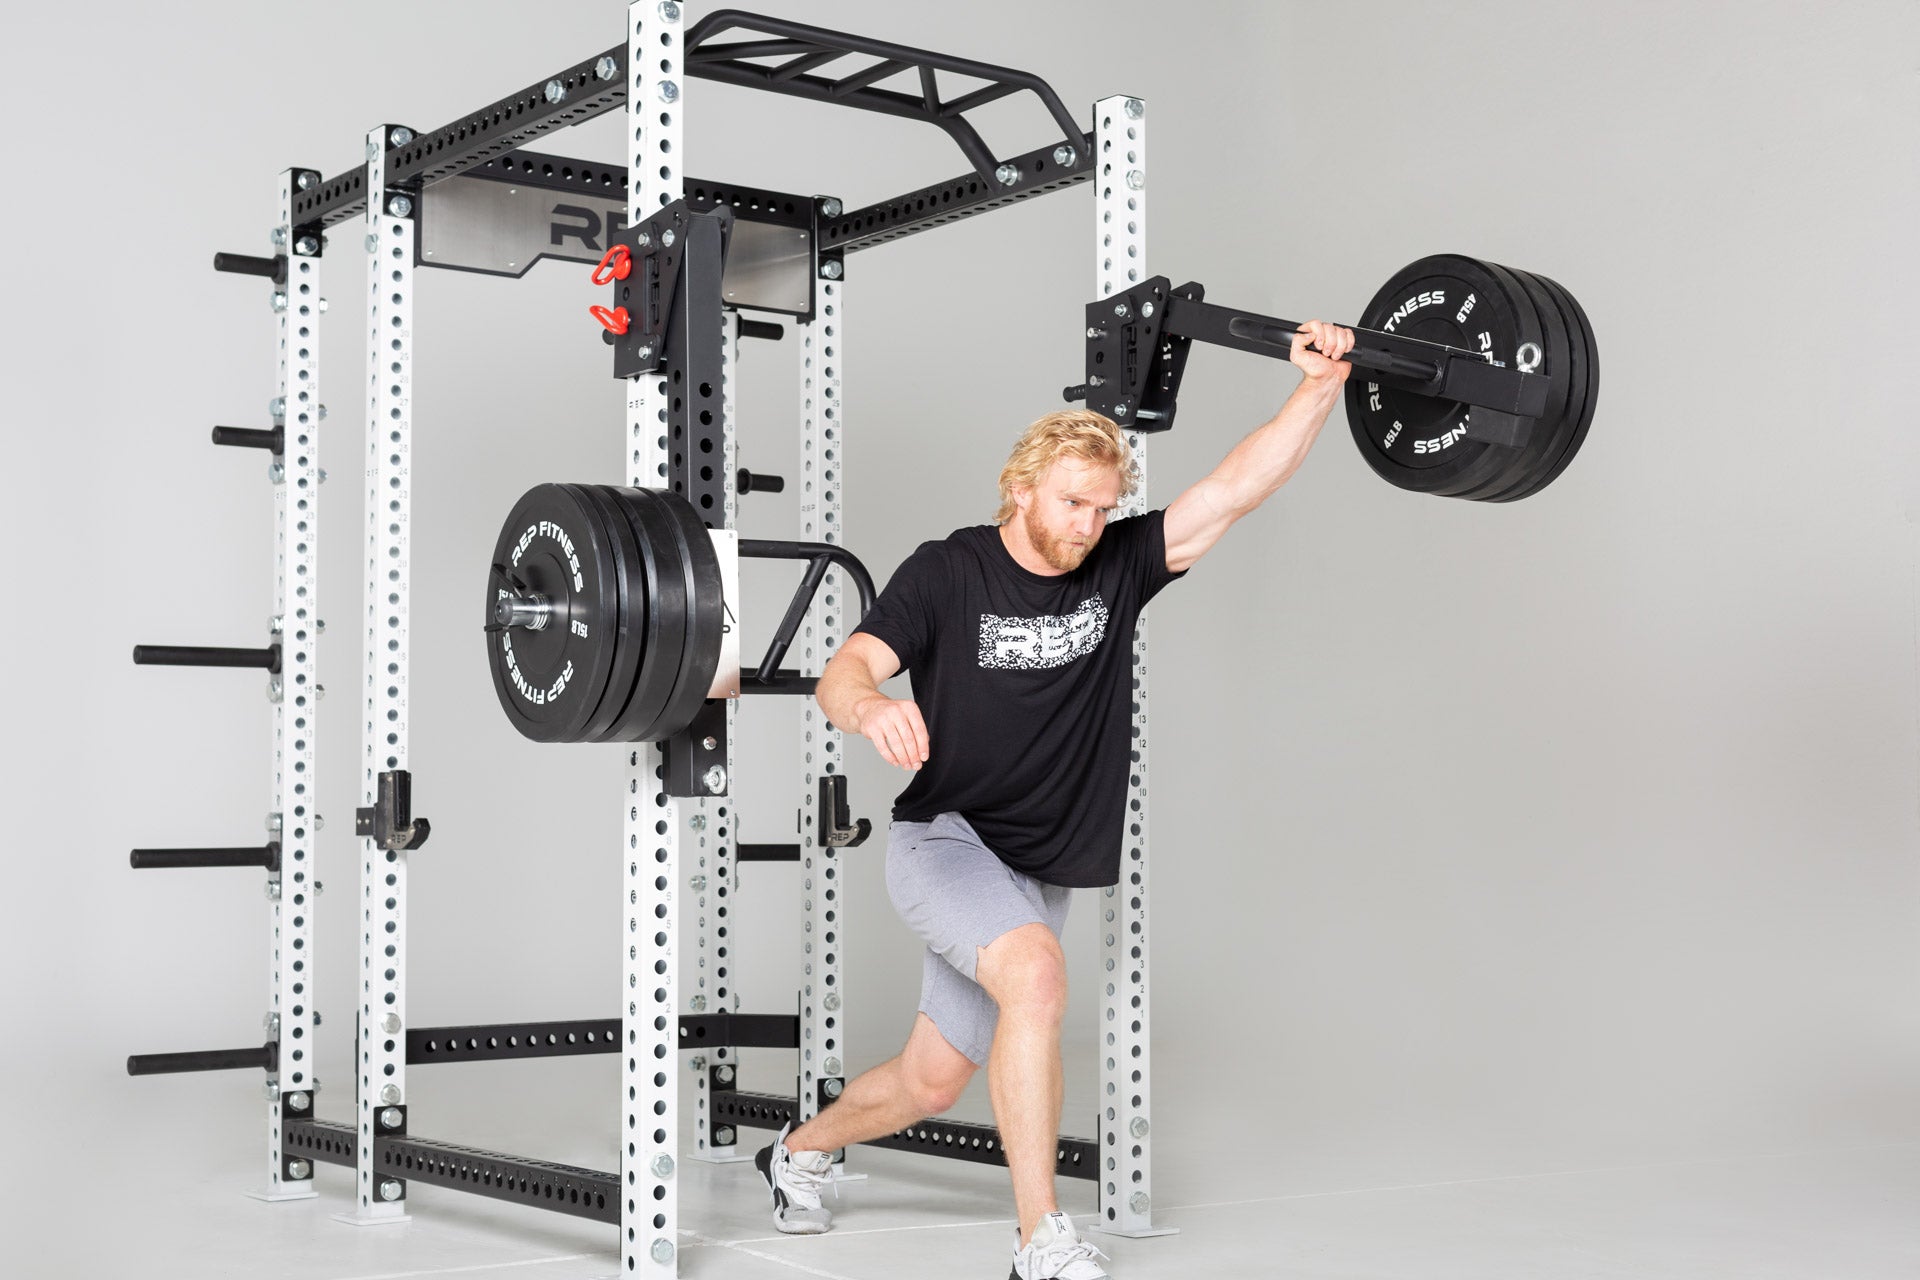 Gifts for Powerlifters, REP Fitness